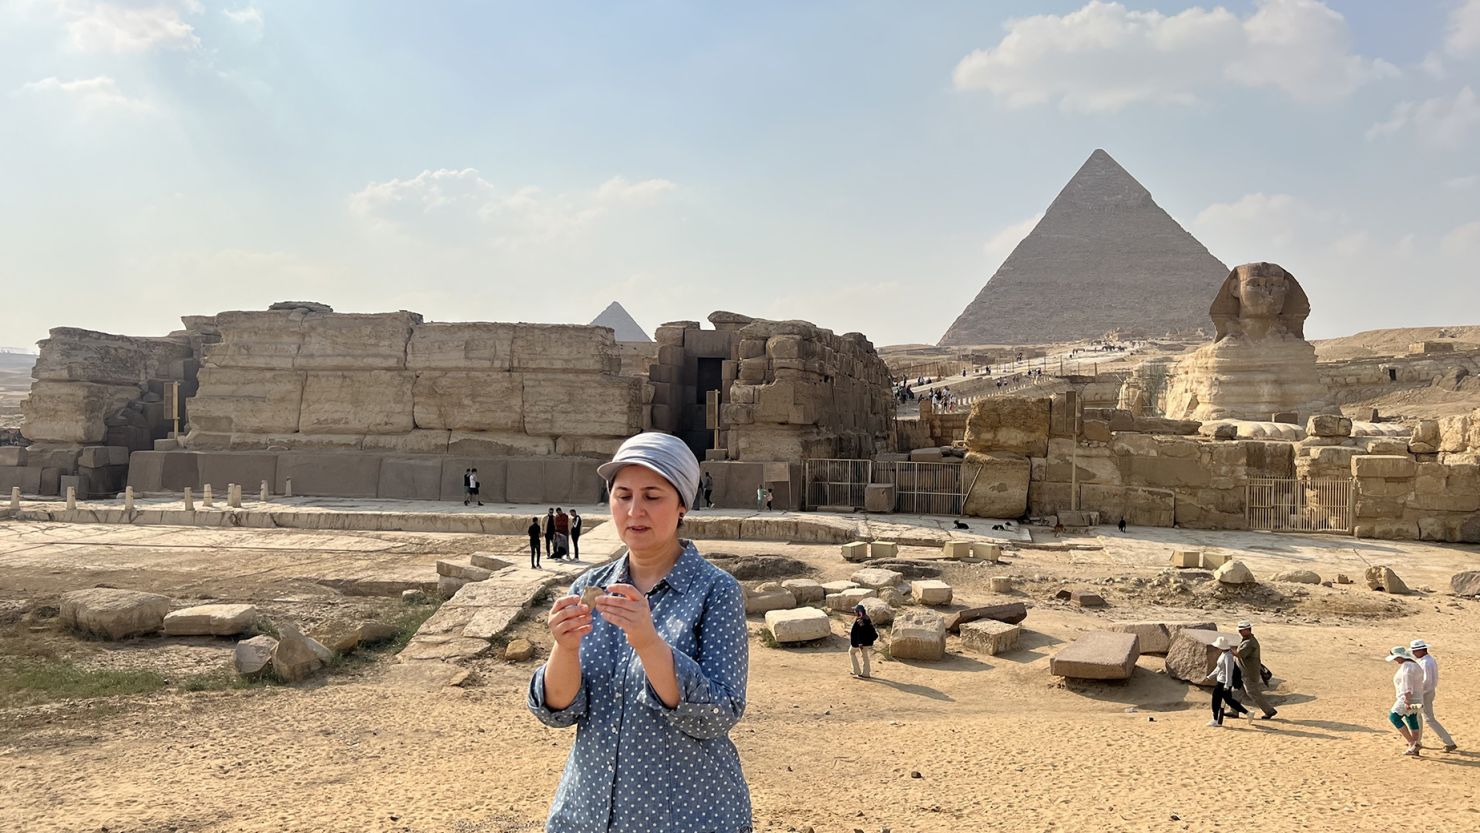 Researcher Eman Ghoneim studies the surface topography of the extinct section of the Nile located in front of the pyramids of Giza and the Great Sphinx.